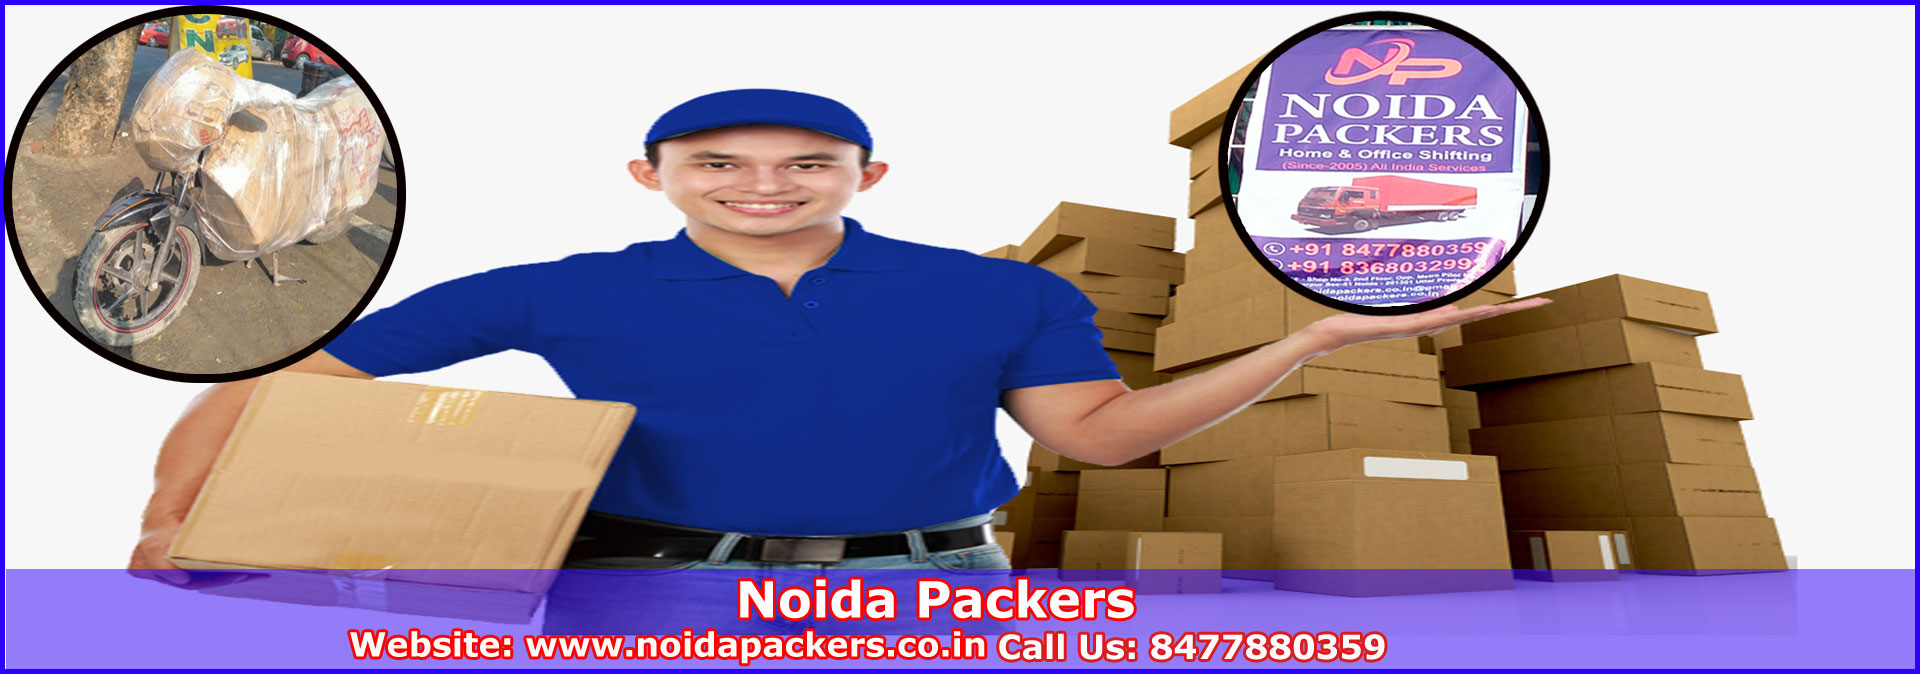 Movers ande Packers Noida Sector 12